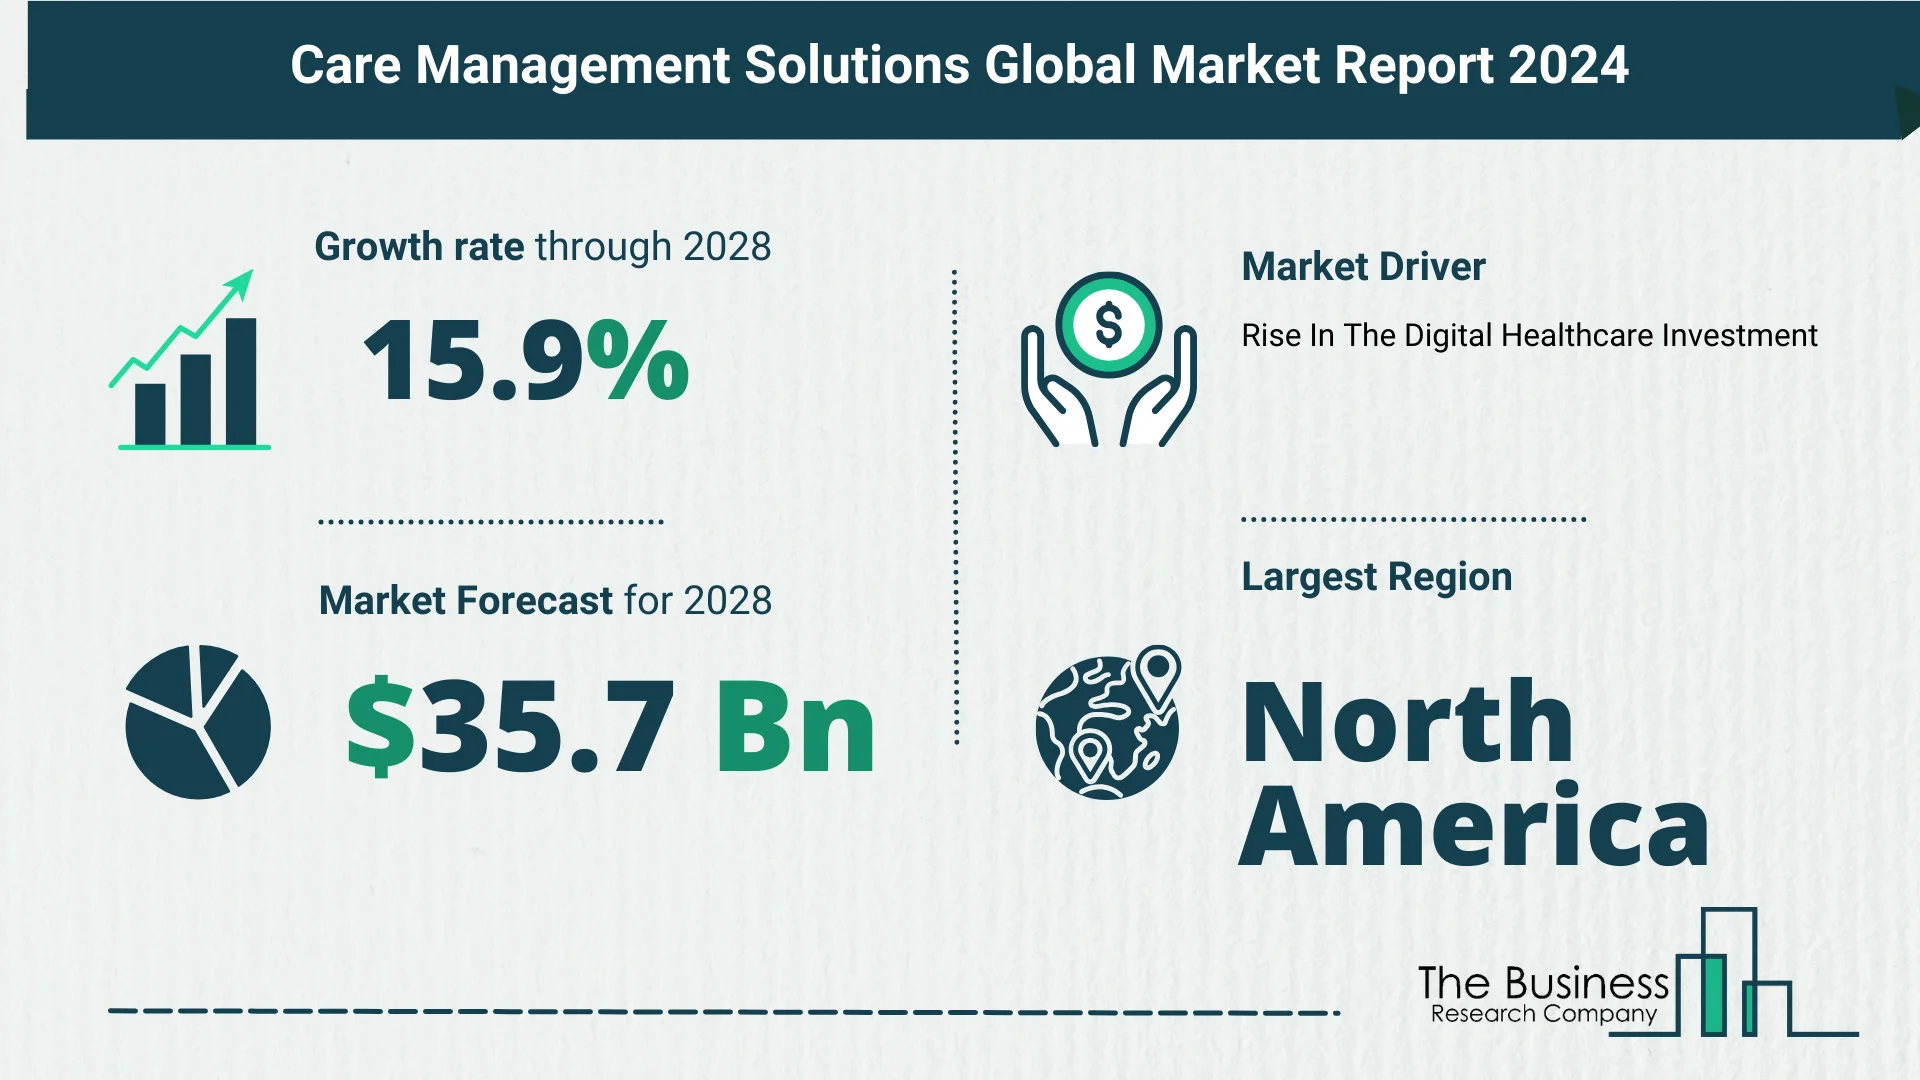 What Is The Forecast Growth Rate For The Care Management Solutions Market?